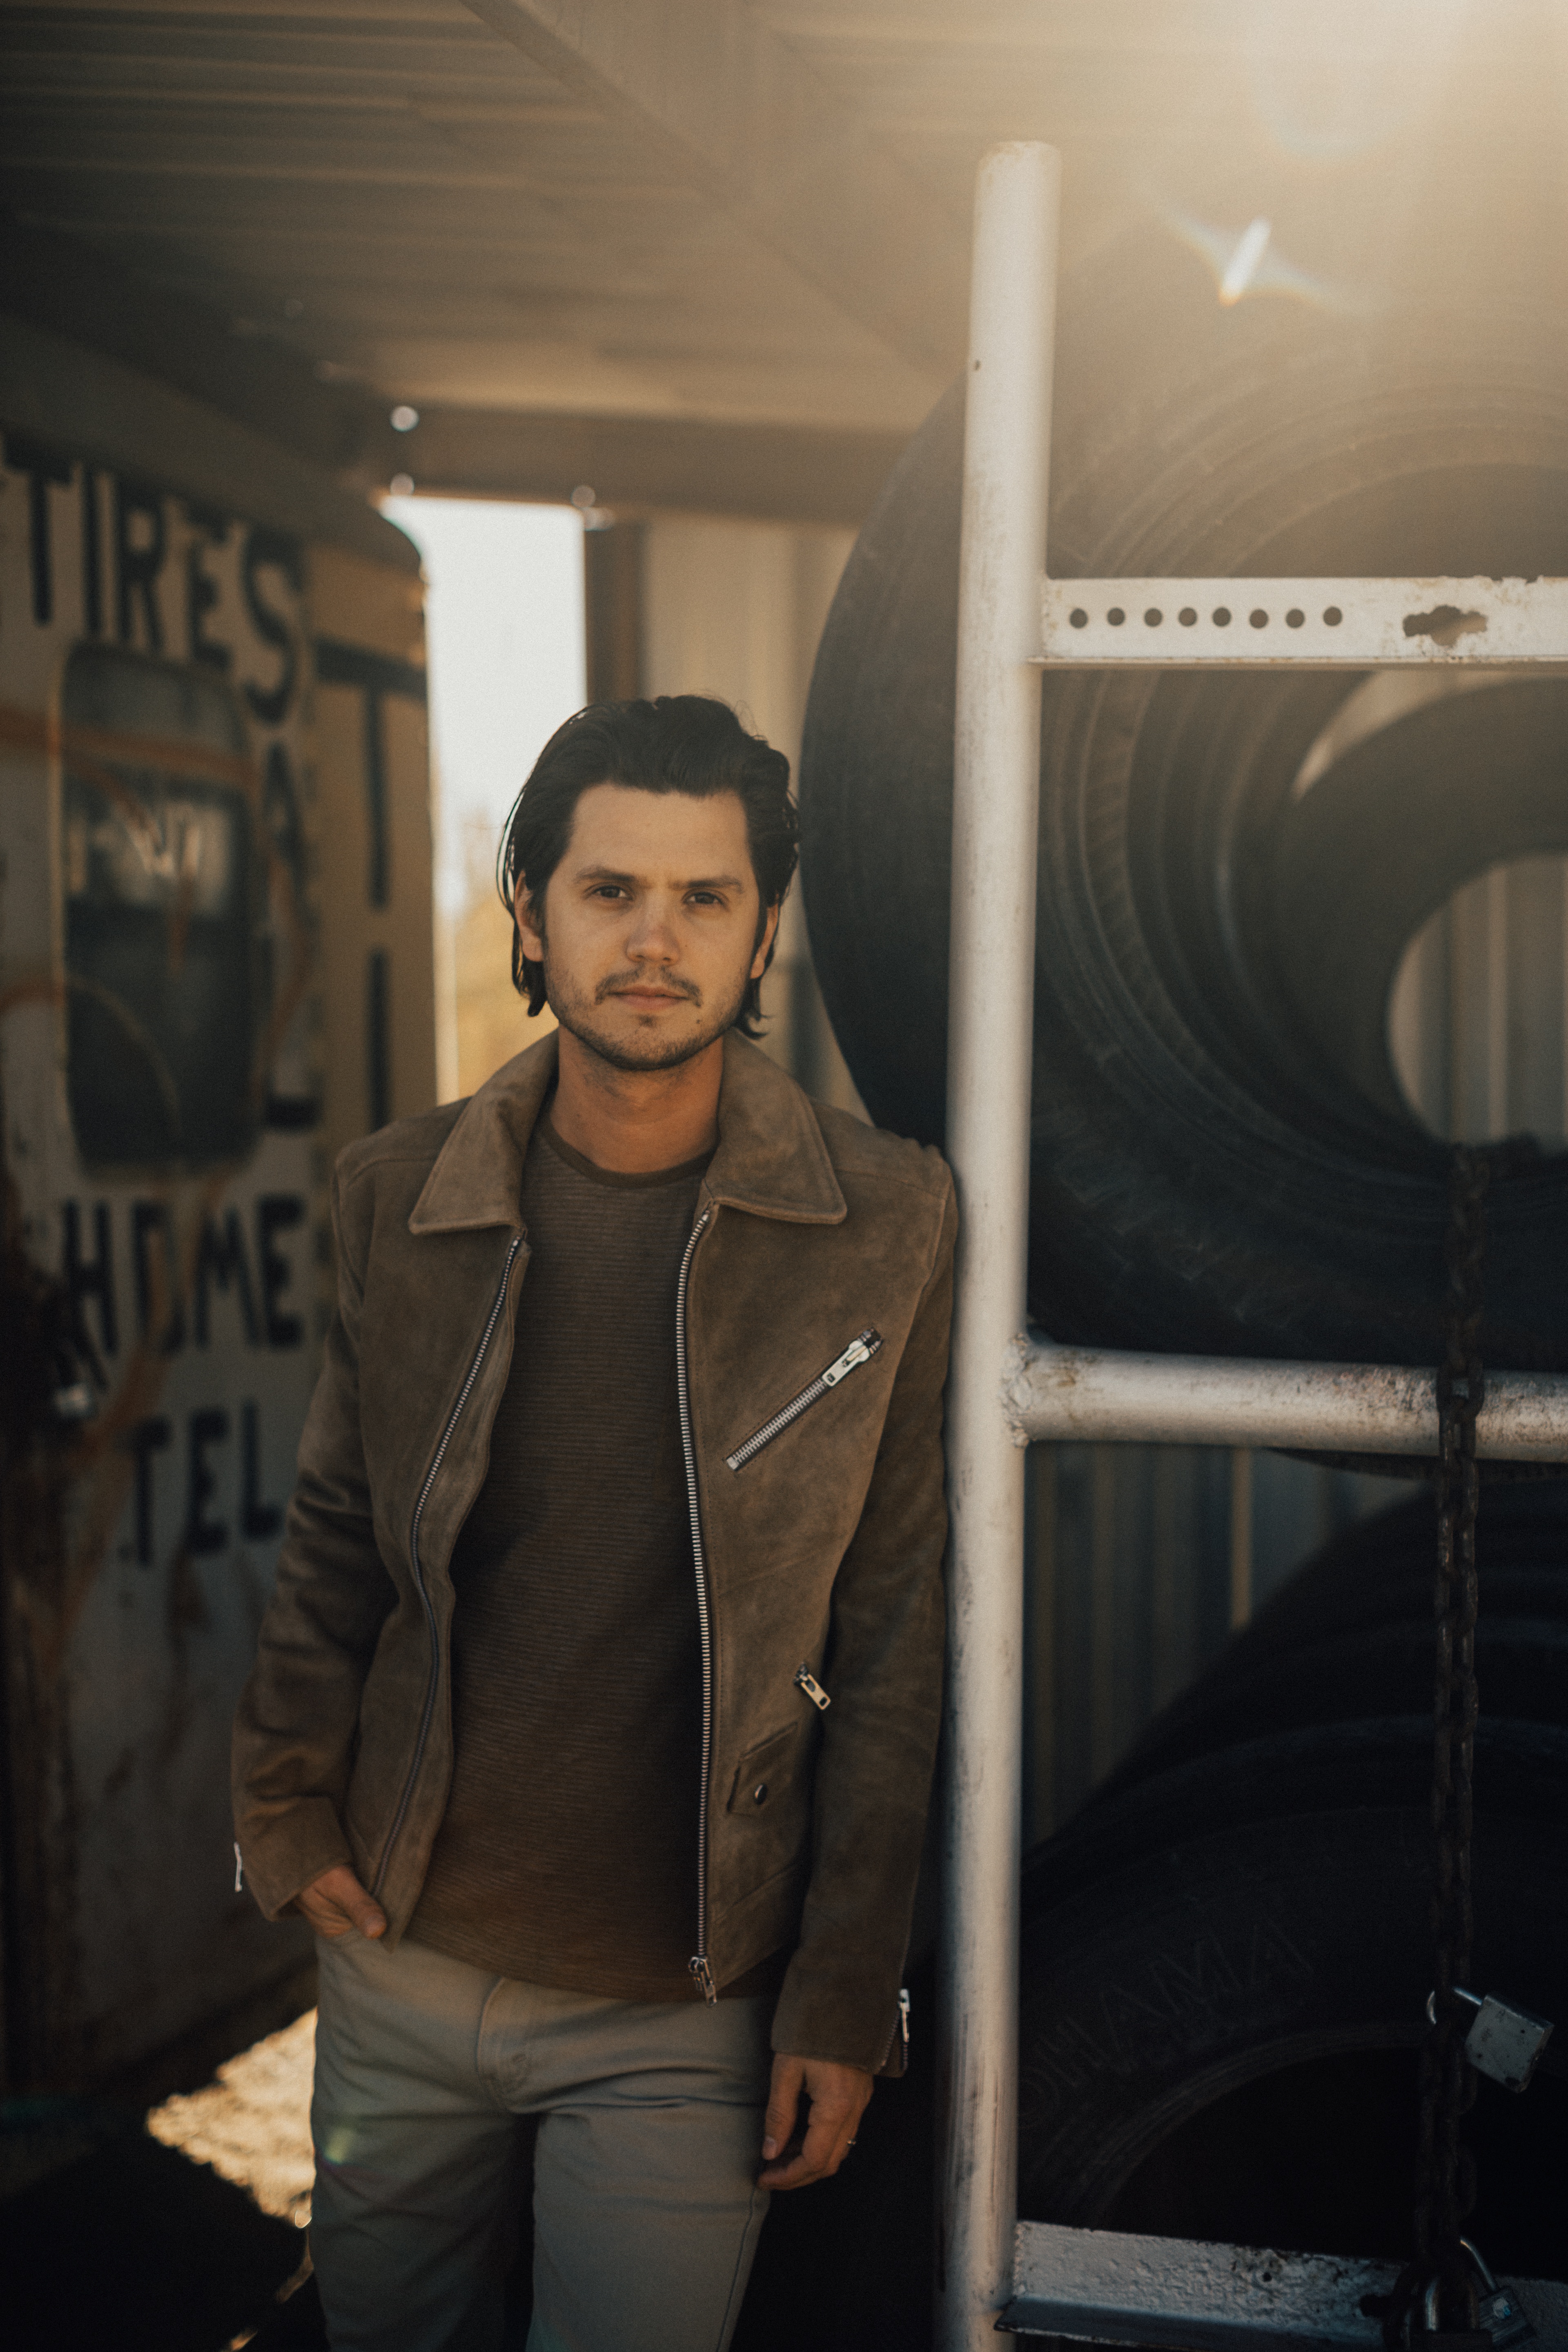 Steve Moakler Previews Upcoming Album With New Track “Slow Down”